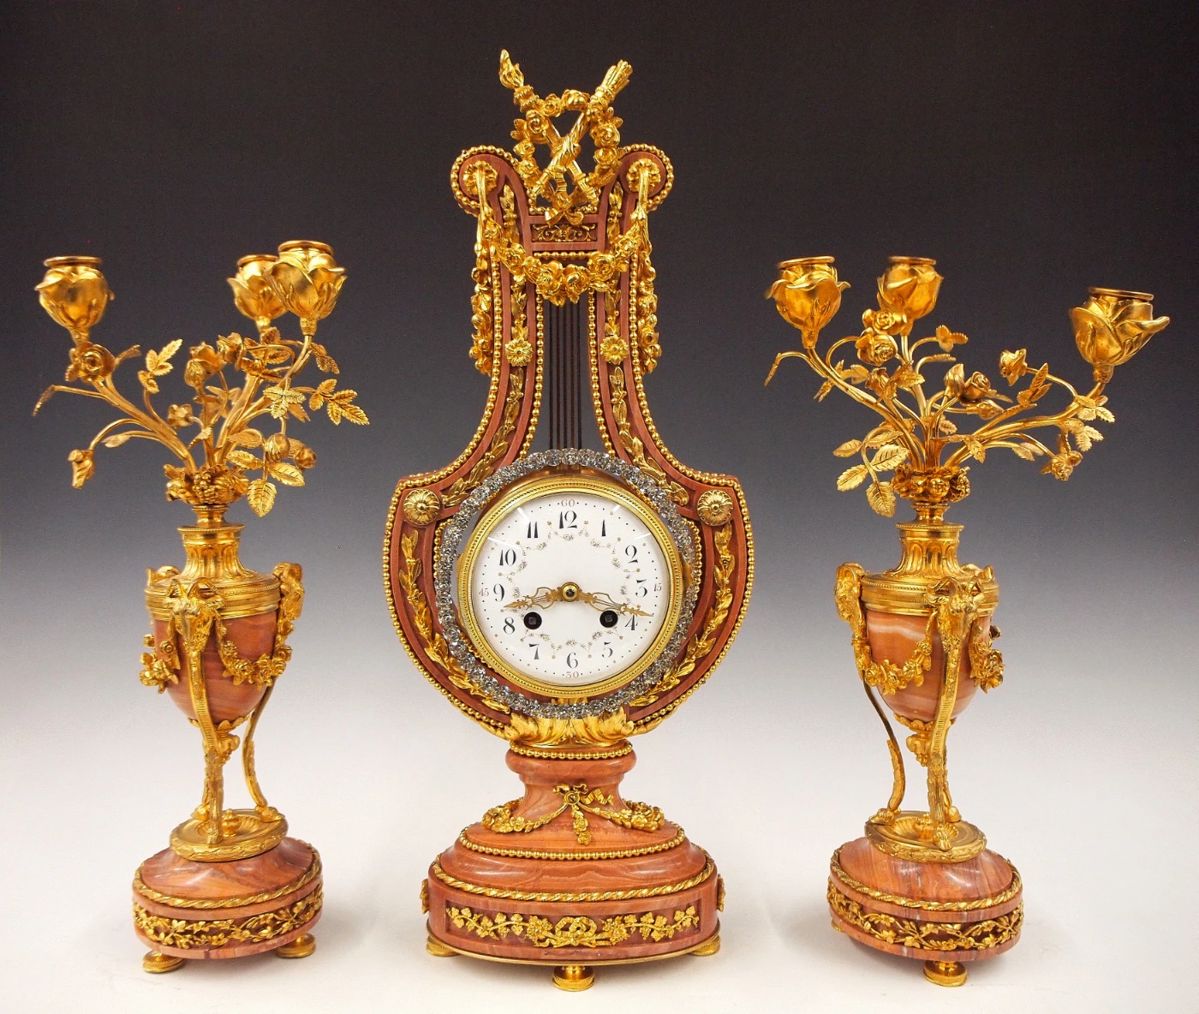 Lot 71: A late 19th century French three piece Gilded Bronze and Marble Lyre clock set.  8-day time and strike movement with knife edge suspension, convex porcelain dial, Arabic numerals with hand painted floral swags and Gilded filigree hands, fitted with a gridiron pendulum and swinging exterior bezel decorated with applied "brilliants", serial #217.  Louis XVI Style Rose Marble case with Gilded Bronze frame with swags and foliate detail, surmounted by torches, on a foliate pedestal base with a pair of three branch candelabra with foliate arms, and tripod bases with Ram's head and foliated swag detail.  Minor wear, hairline free dial, minor fissures in stone, movement complete and running when cataloged, set-up and balancing will be required after moving.  18 3/4" high overall.  ESTIMATE $4,000-6,000
